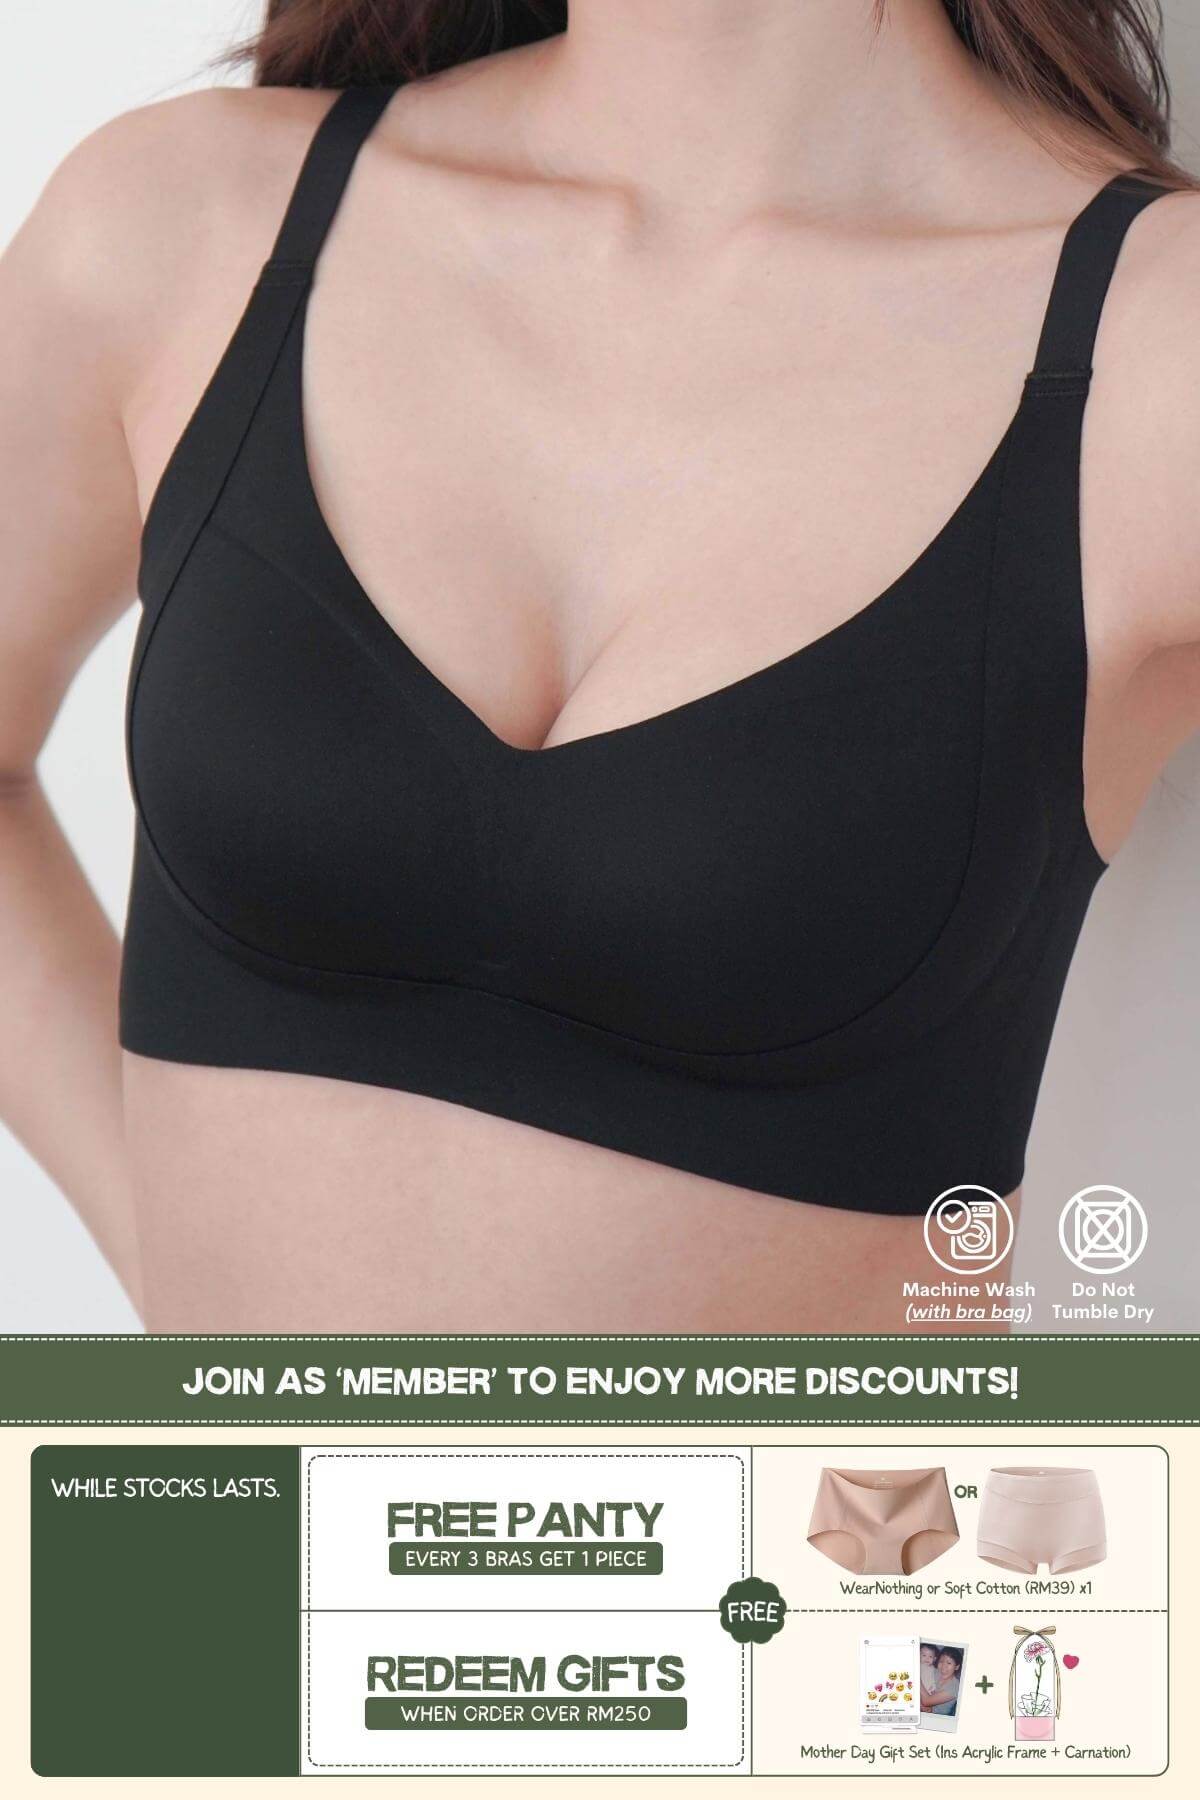 [Top Pick] Routine Curvy Seamless Push Up Bra In Black - Adelais Official - Bra - Coverage & Push Up & Seamless